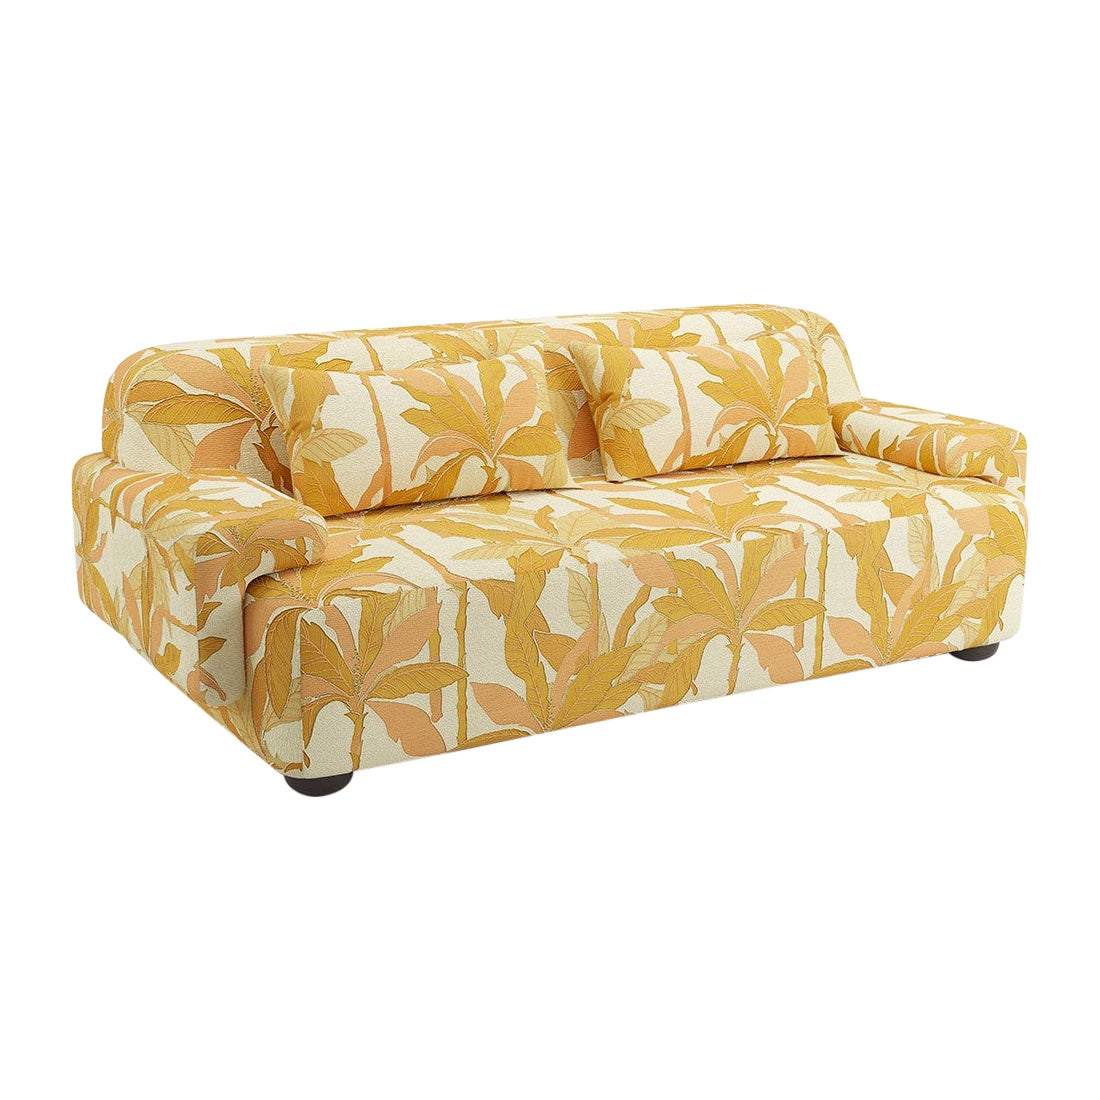 Popus Editions Lena 2.5 Seater Sofa in Rust Miami Jacquard Upholstery